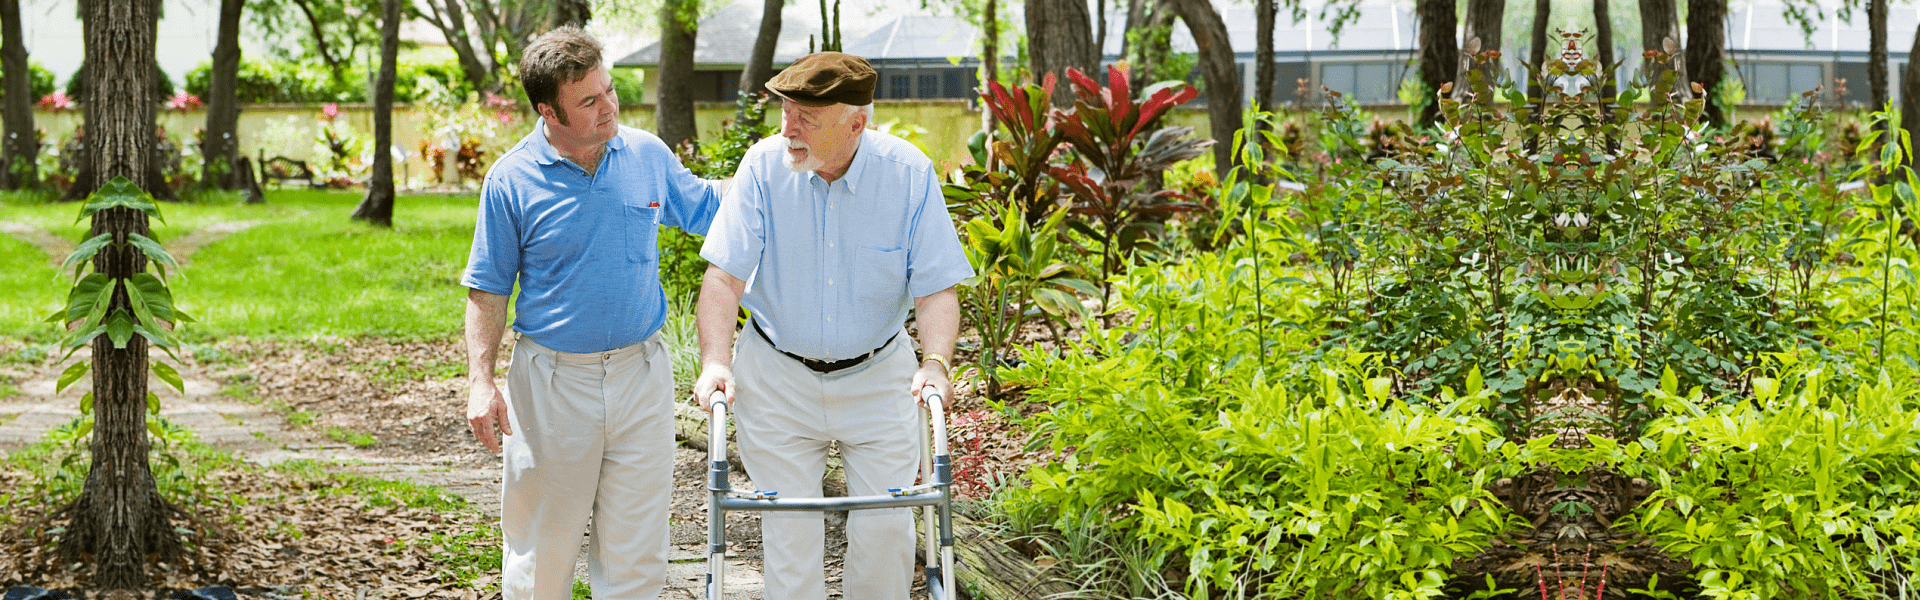 elderly man assisted by a caregiver